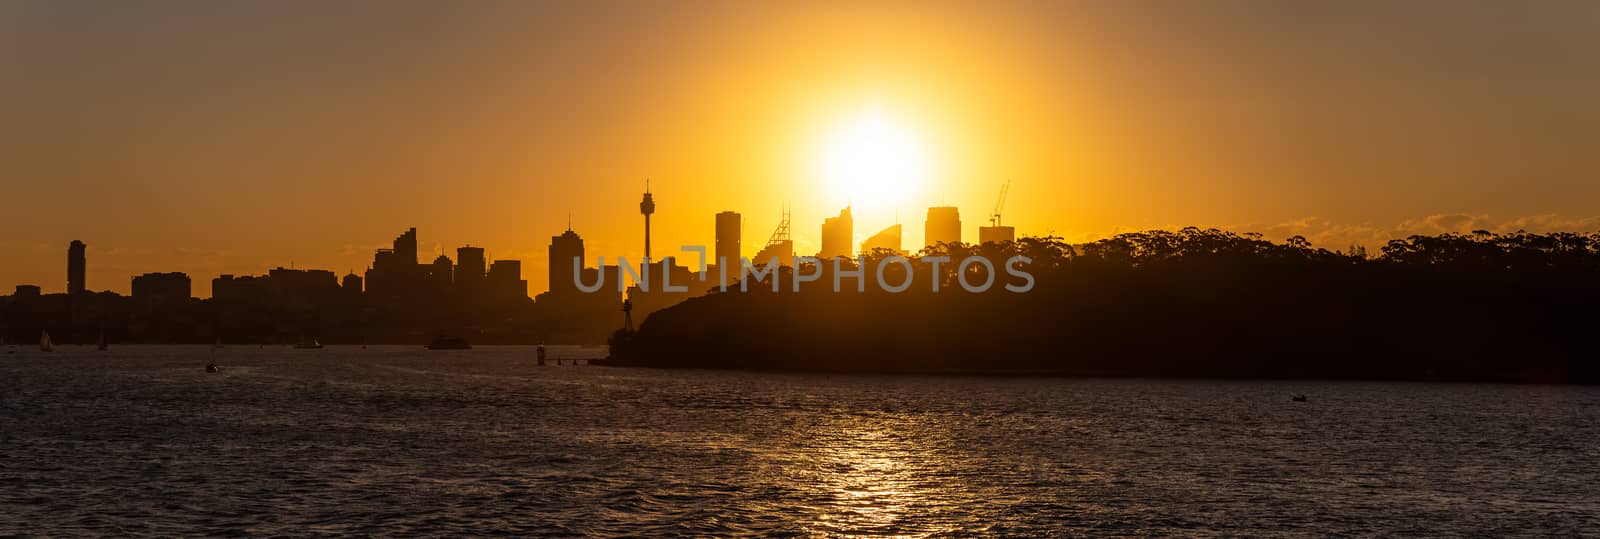 Panoramic silhouette view of Sydney downtown and harbor with trees in the foreground. Beautiful orange sky and sun setting in the background